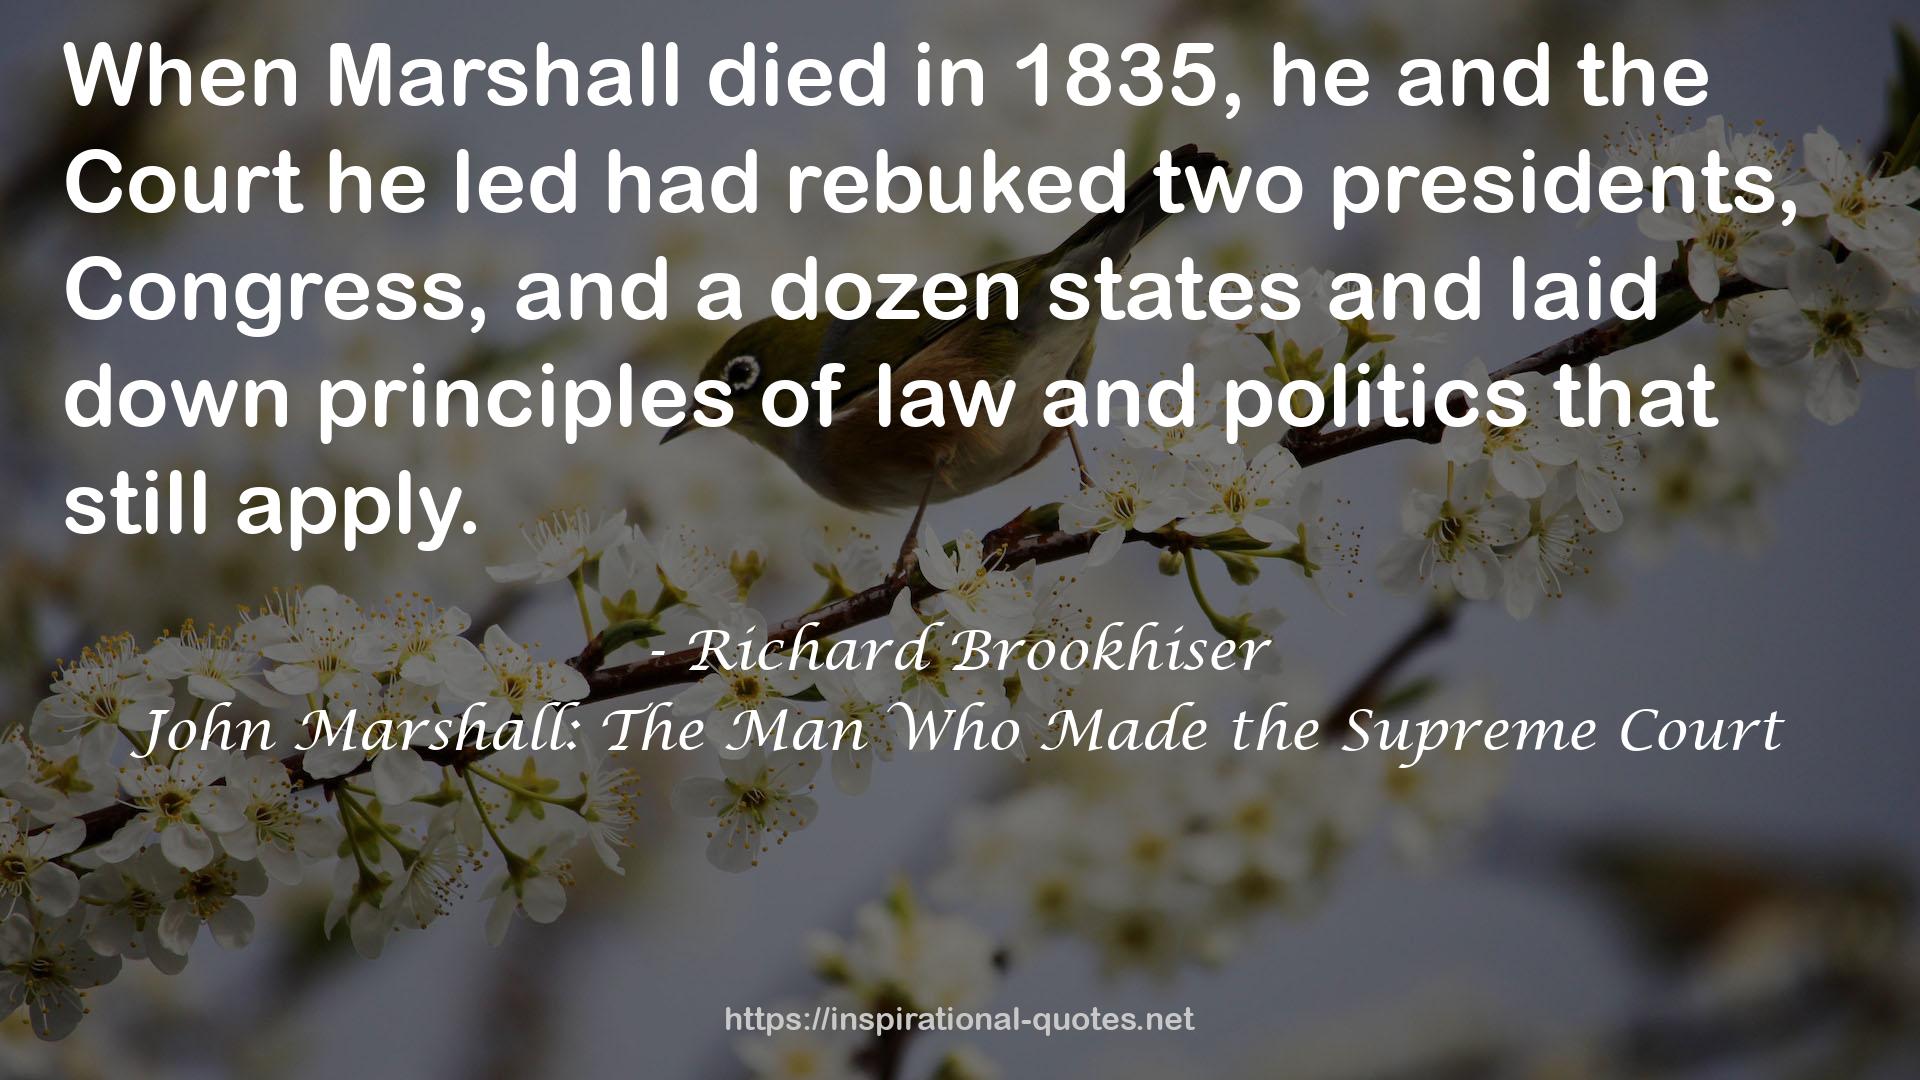 John Marshall: The Man Who Made the Supreme Court QUOTES